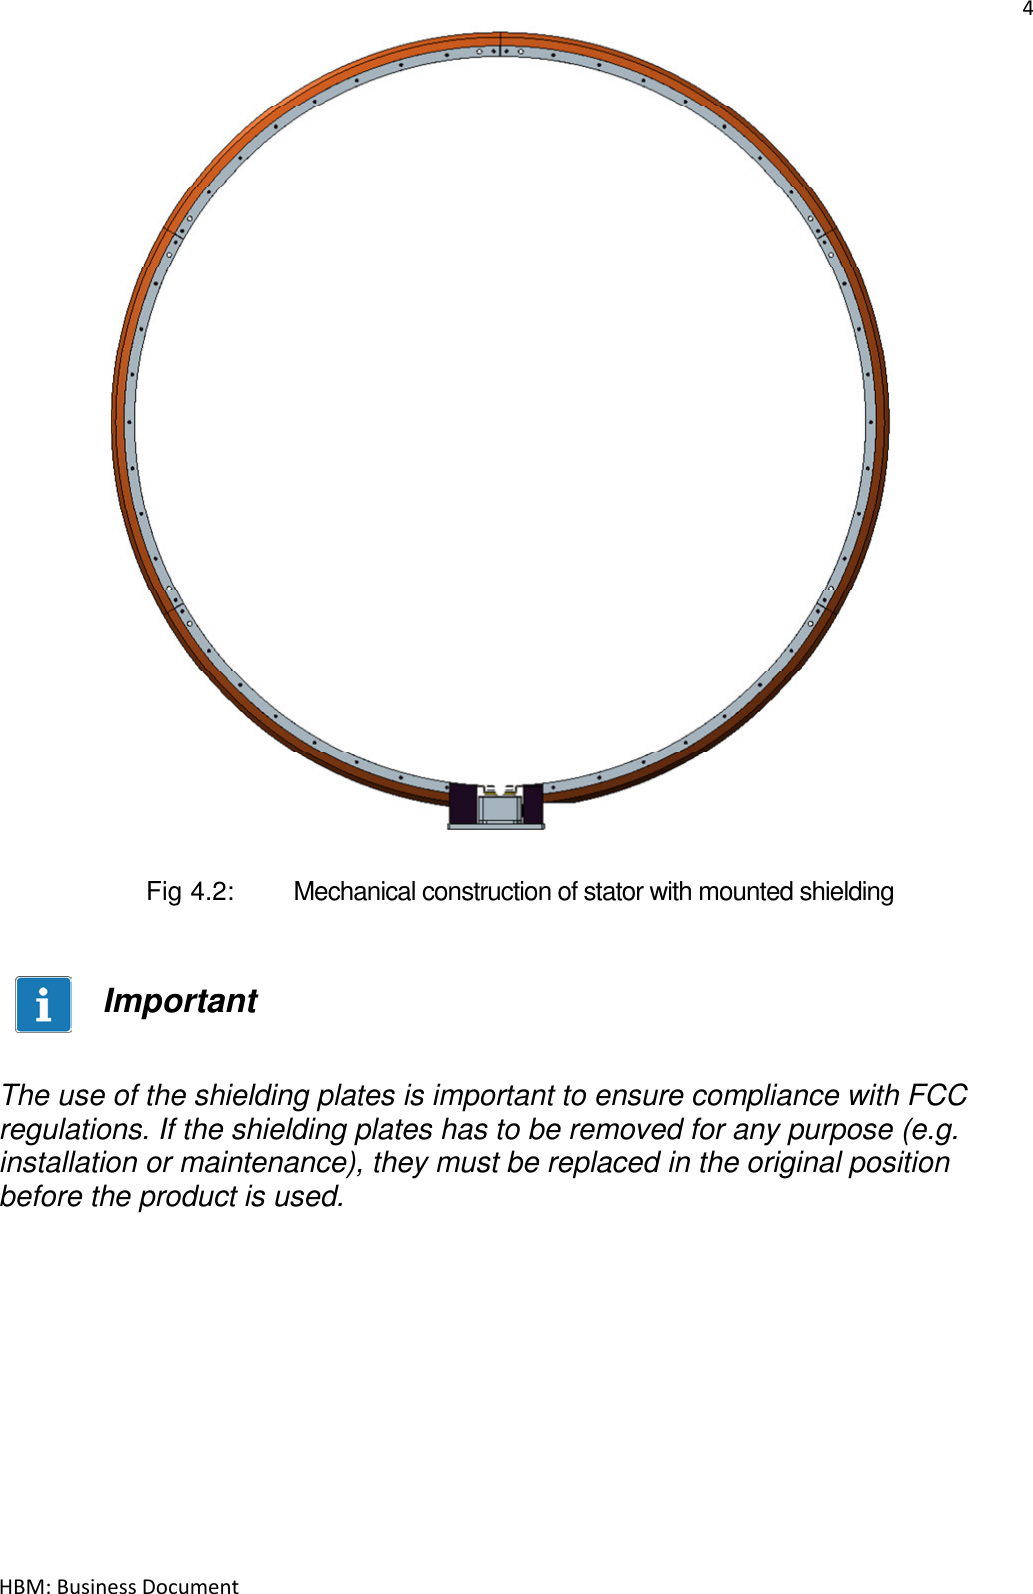 4  HBM: Business Document                         Fig 4.2:   Mechanical construction of stator with mounted shielding   Important   The use of the shielding plates is important to ensure compliance with FCC regulations. If the shielding plates has to be removed for any purpose (e.g. installation or maintenance), they must be replaced in the original position before the product is used.    